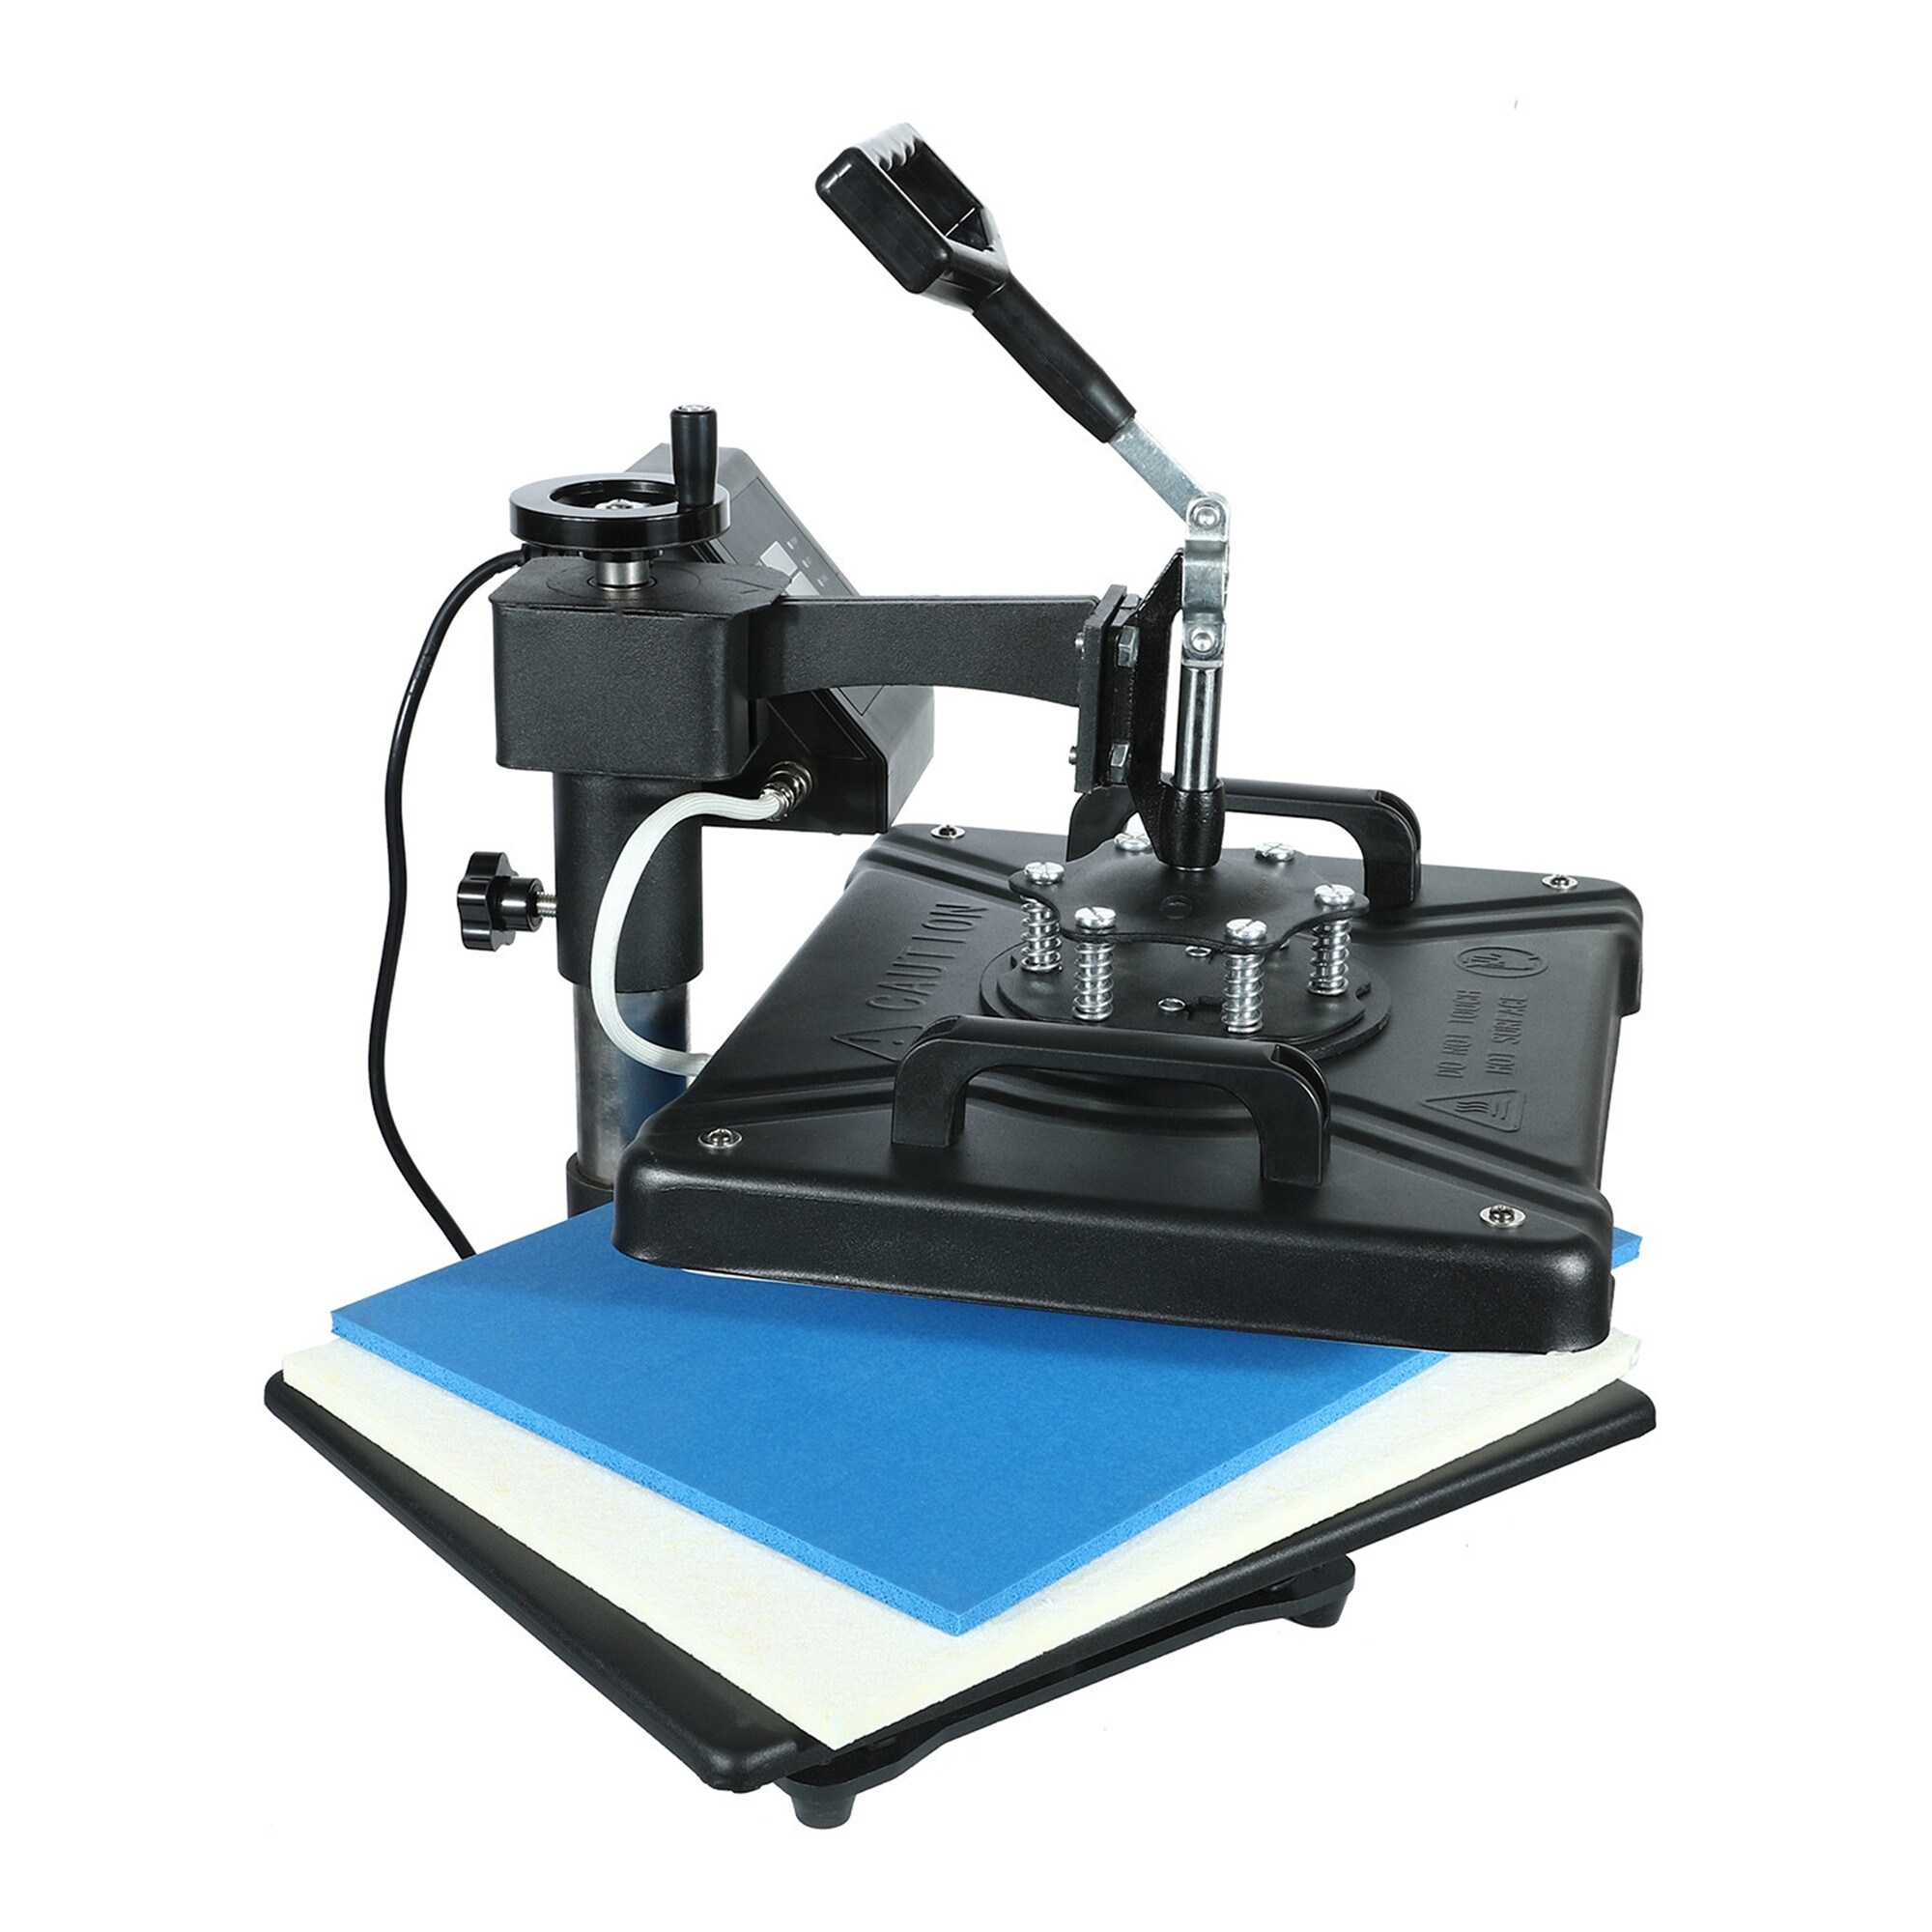 Heat Press 5 in 1 Digital Hot Press Sublimation Machine for T